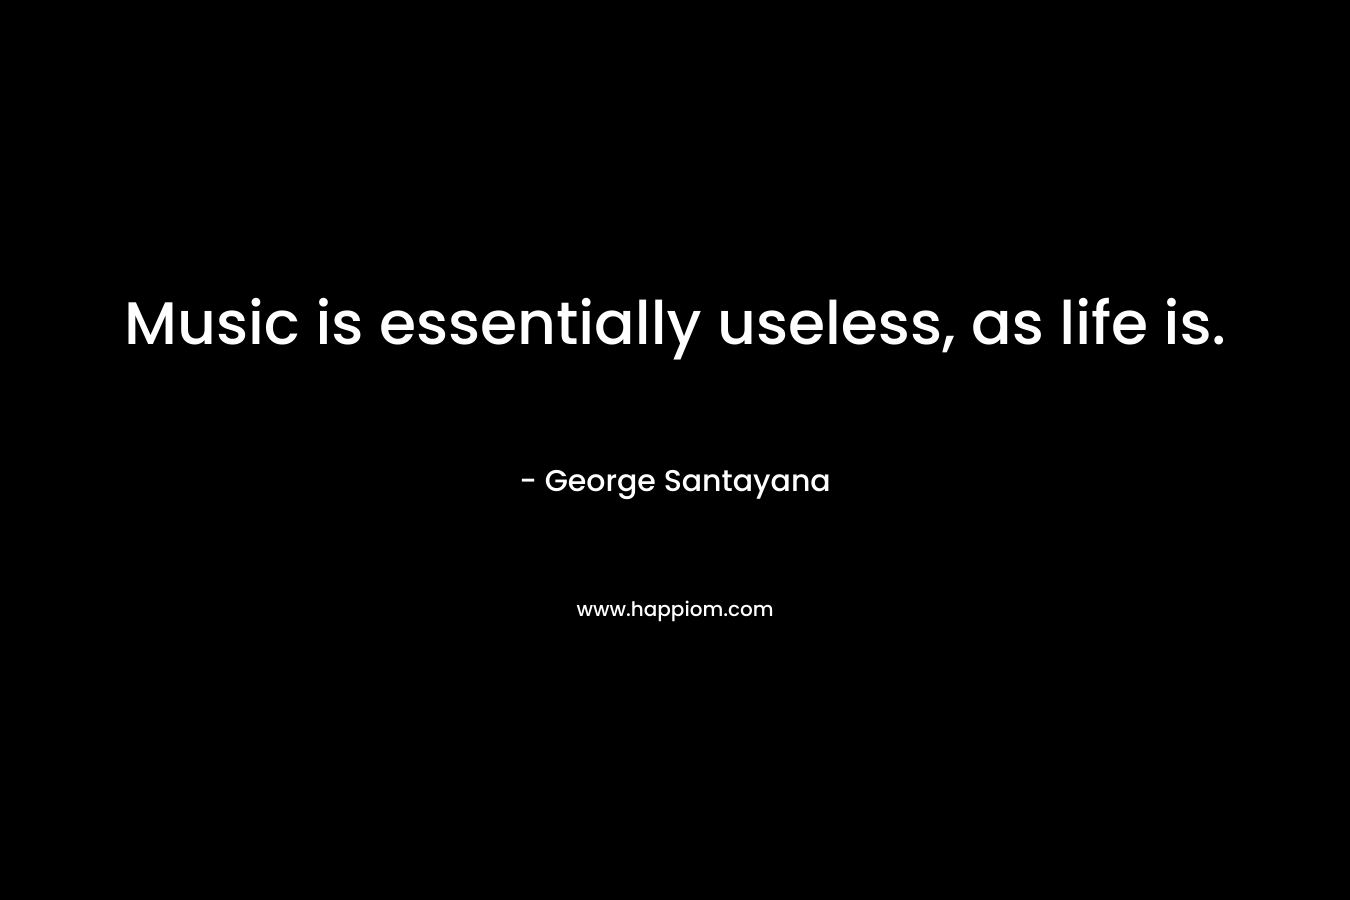 Music is essentially useless, as life is. – George Santayana